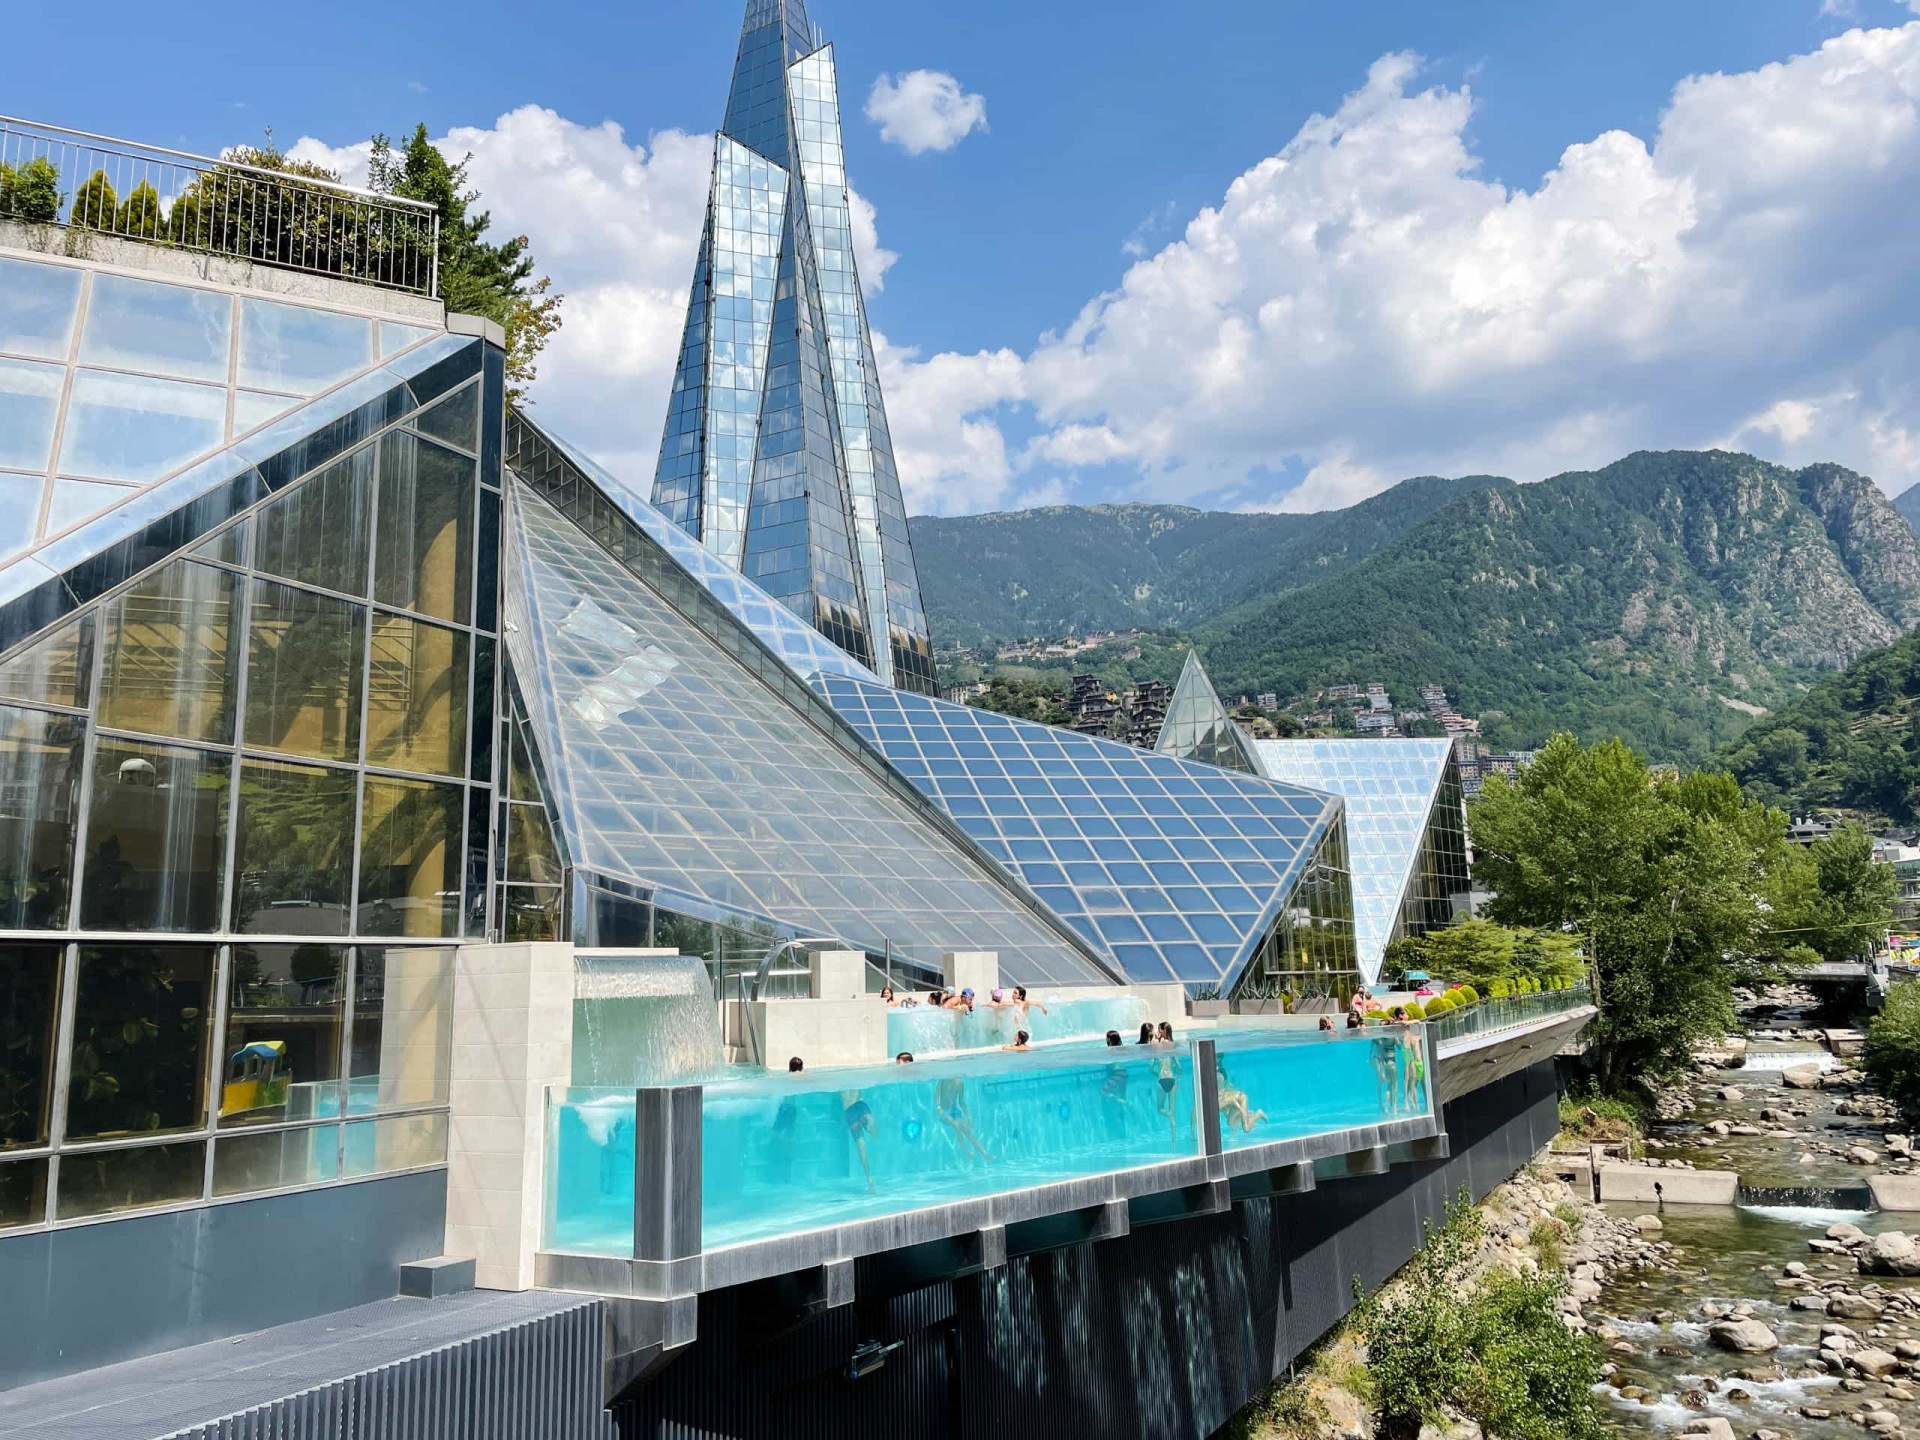 <p>Just outside Andorra la Vella, in the town of Les Escaldes, lies the Caldea Spa complex, one of the largest spas in Europe and the tallest building in Andorra. Towering 18 stories high, it features countless thermal baths, pools, and steam rooms.</p><p>You may also like:<a href="https://www.starsinsider.com/n/185439?utm_source=msn.com&utm_medium=display&utm_campaign=referral_description&utm_content=597567en-za"> Fallen stars: celebrities who perished in air crashes</a></p>